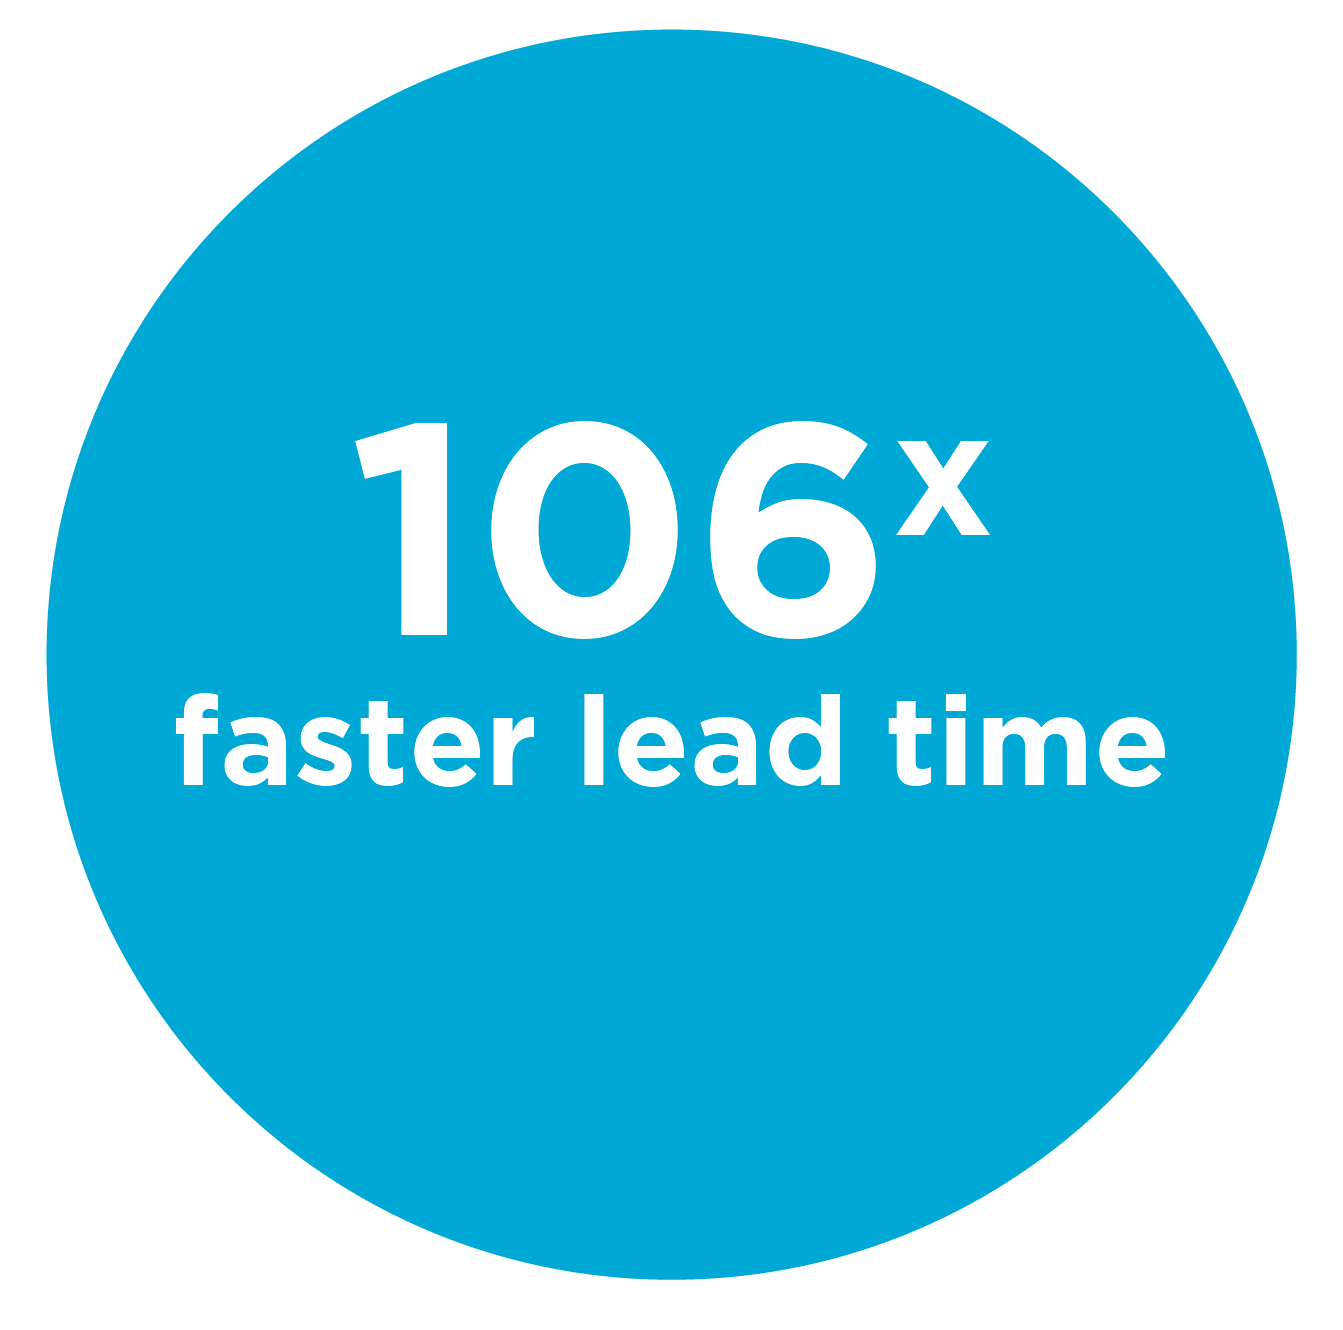 More competitive and faster lead times with db2